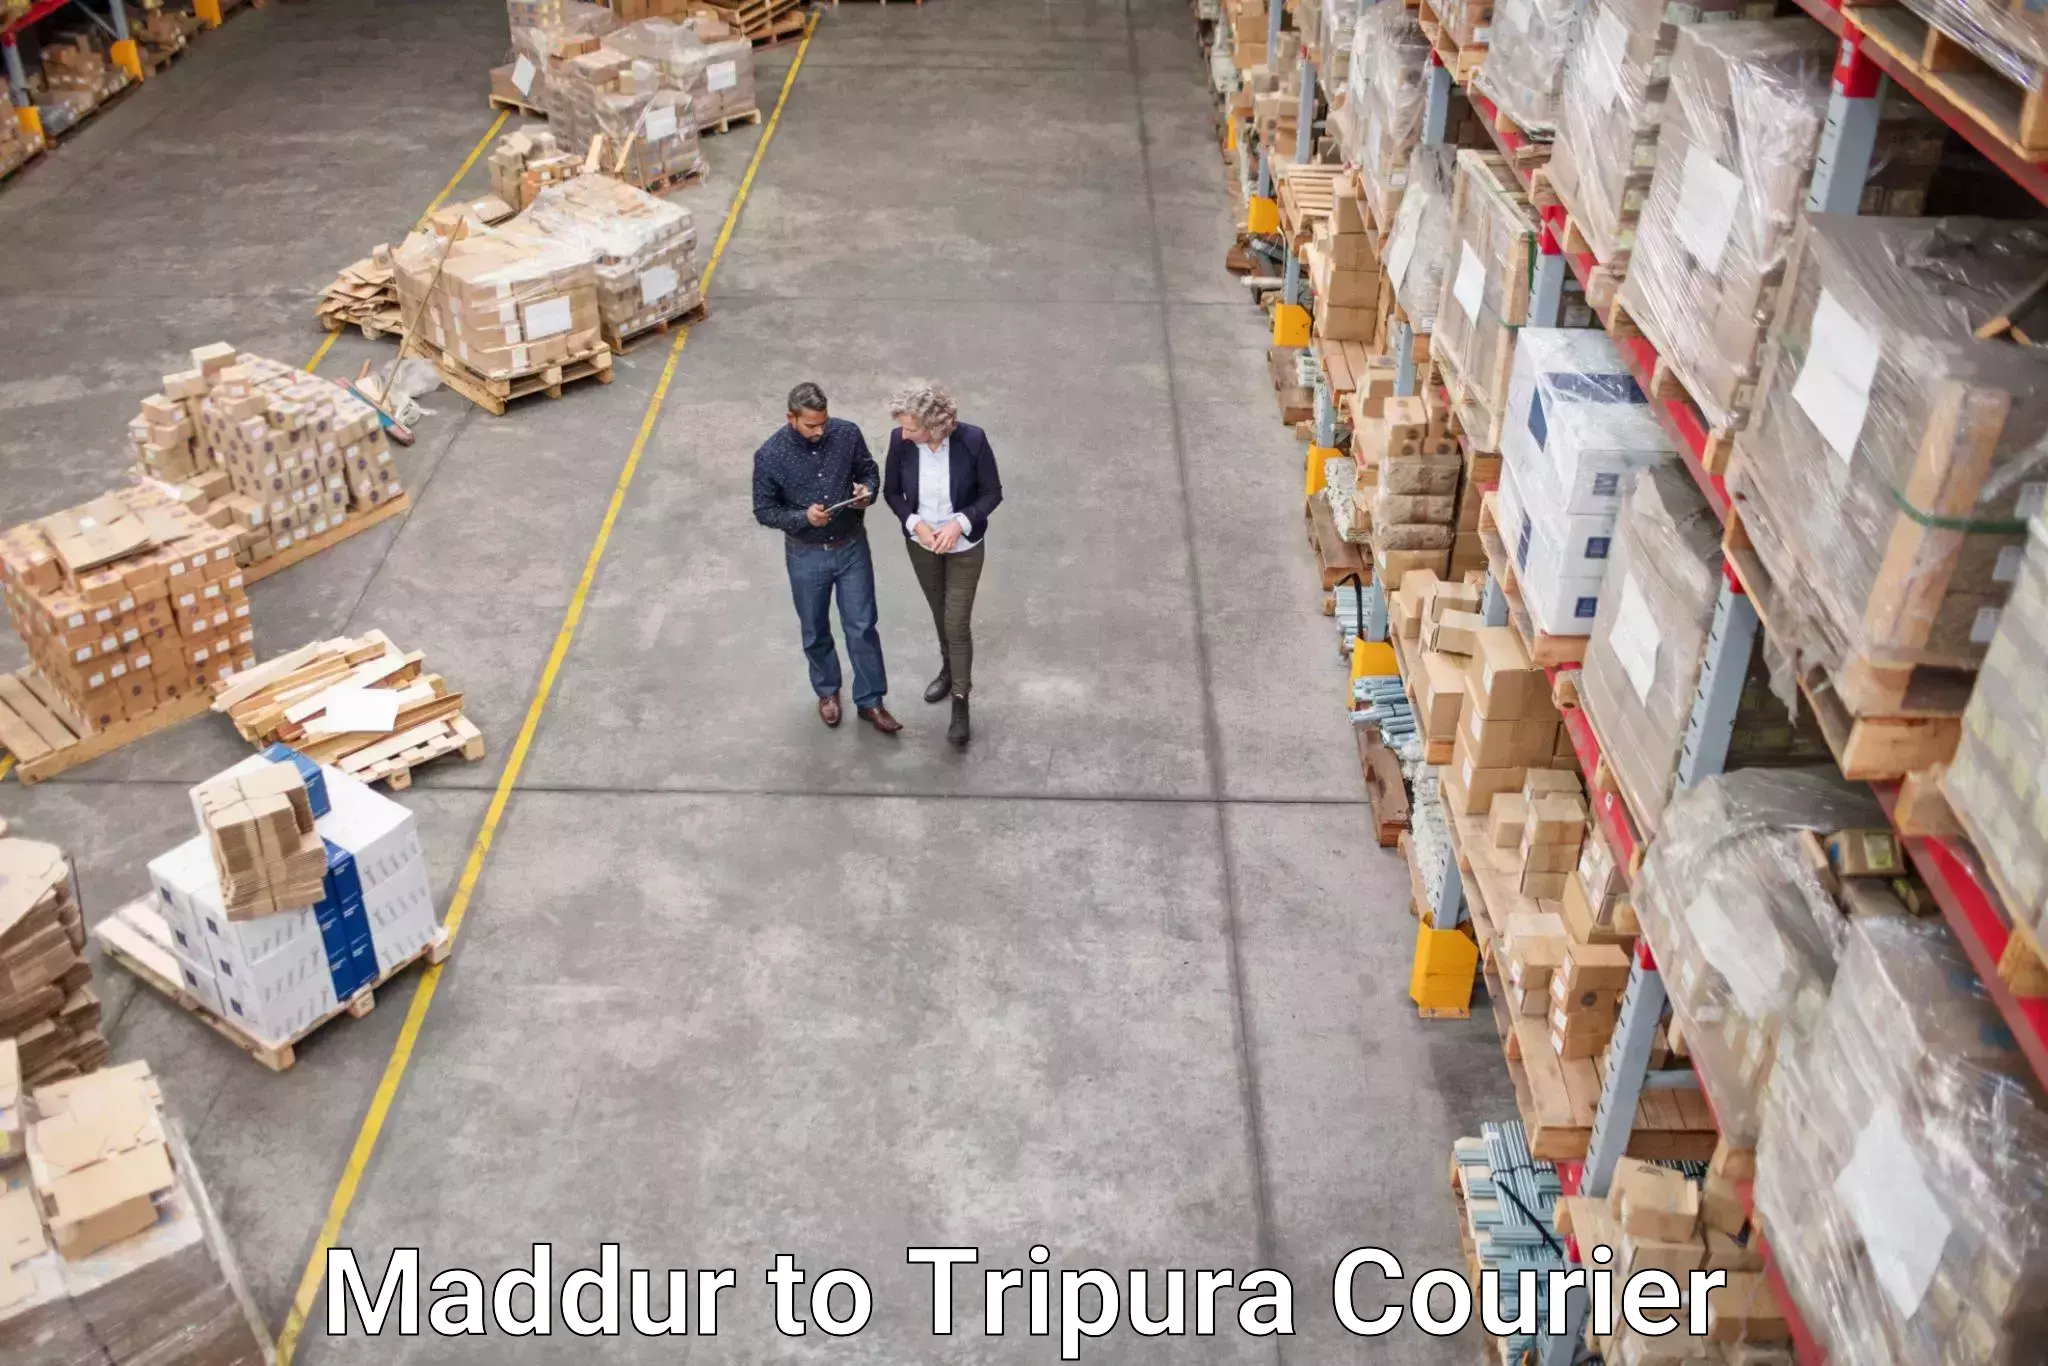 Customized delivery options in Maddur to Udaipur Tripura